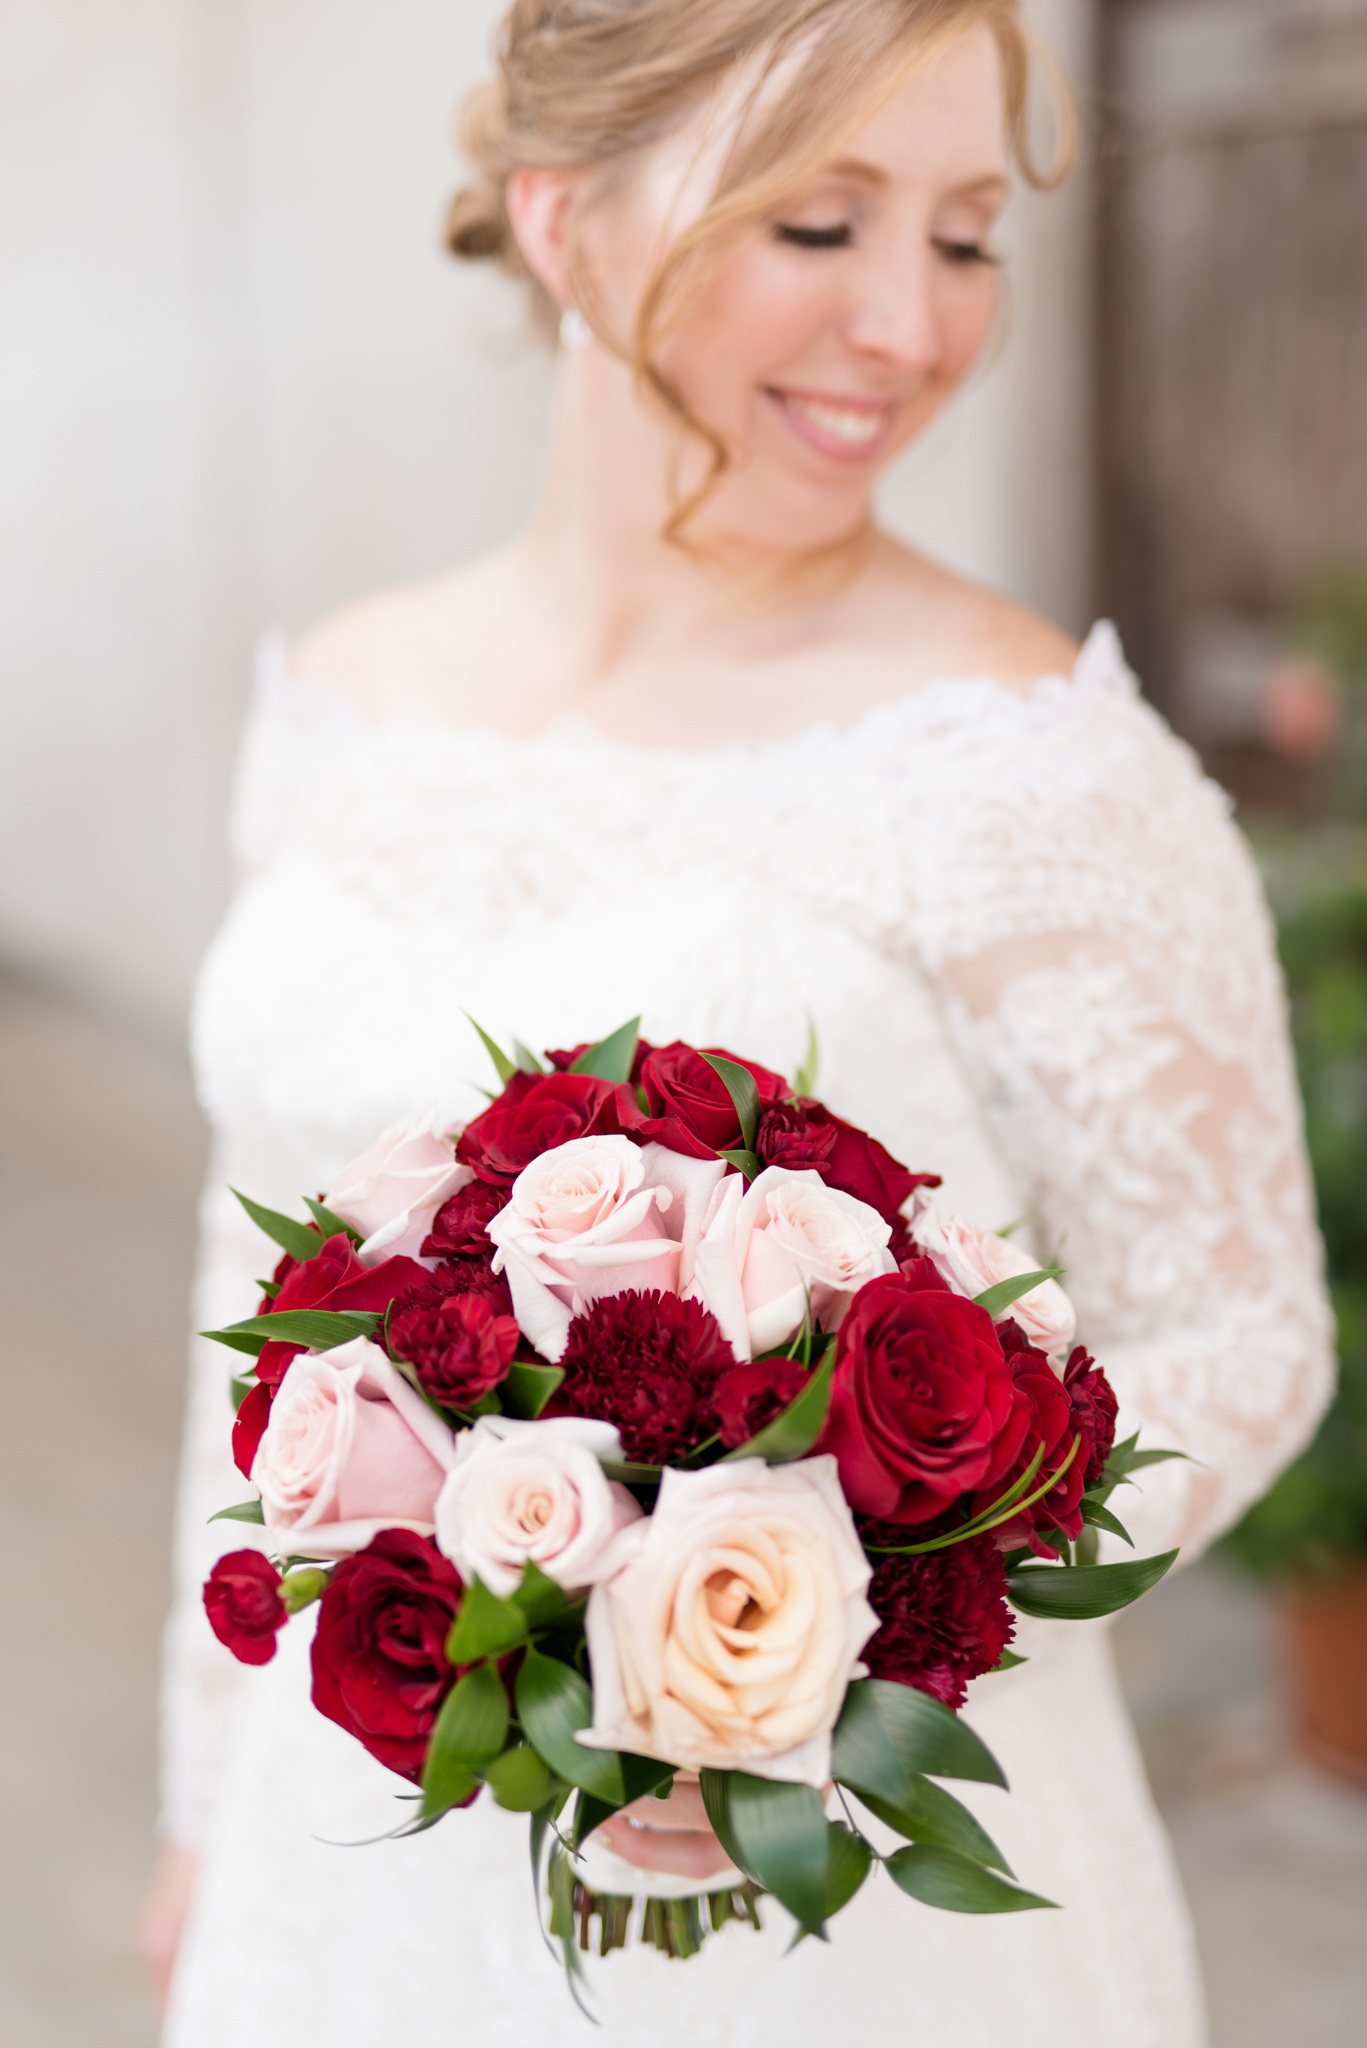 Bride holds flowers and smiles.